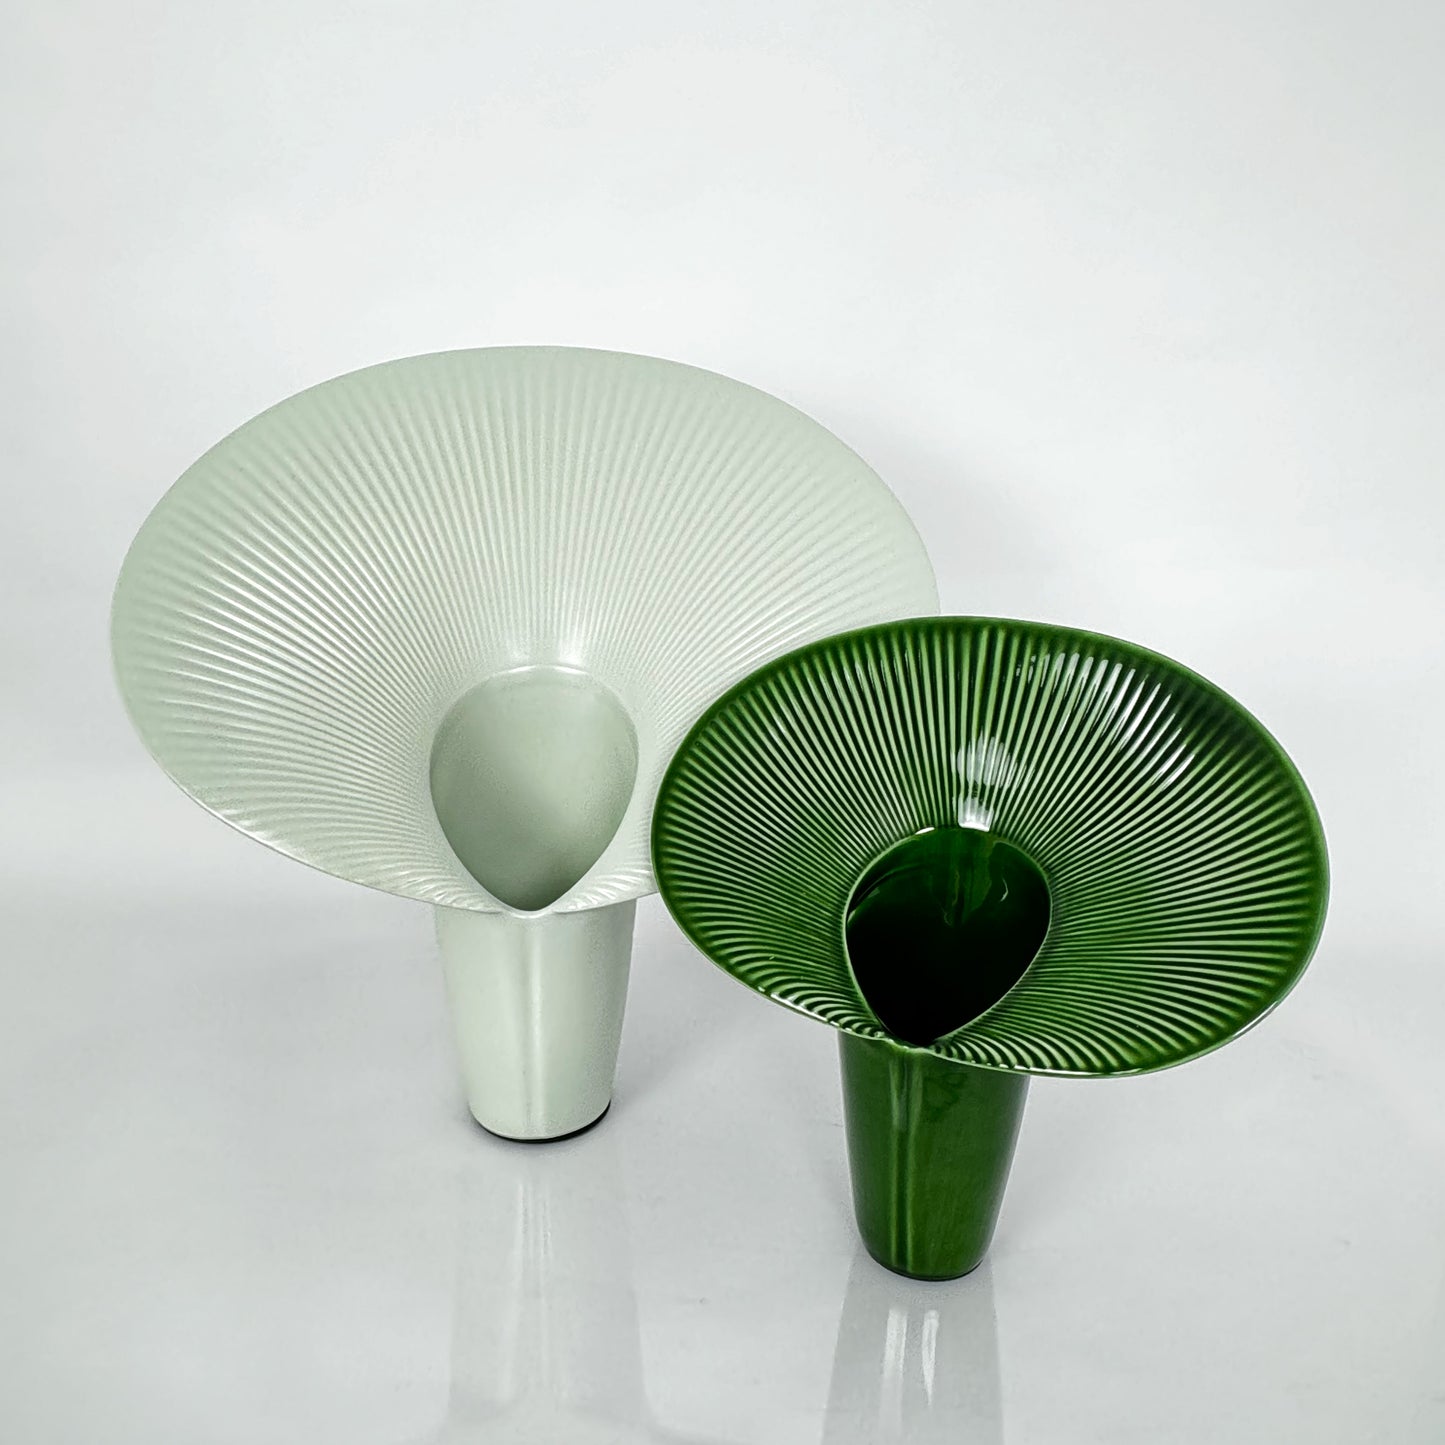 Fusca 13" Vase in Glossy Forest Green